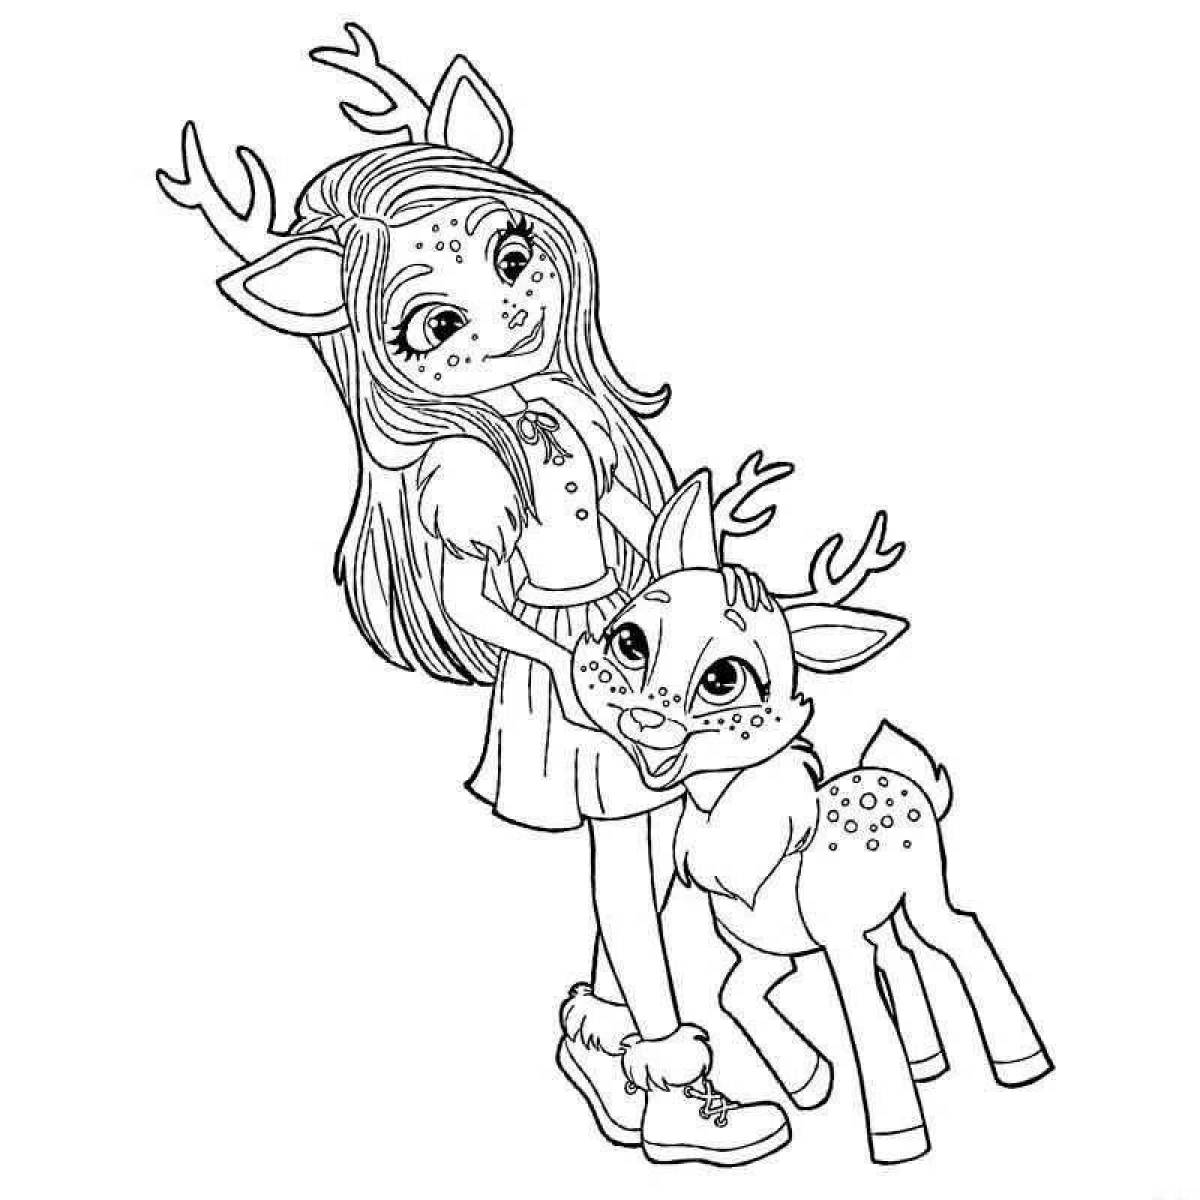 Enchansimals coloring pages